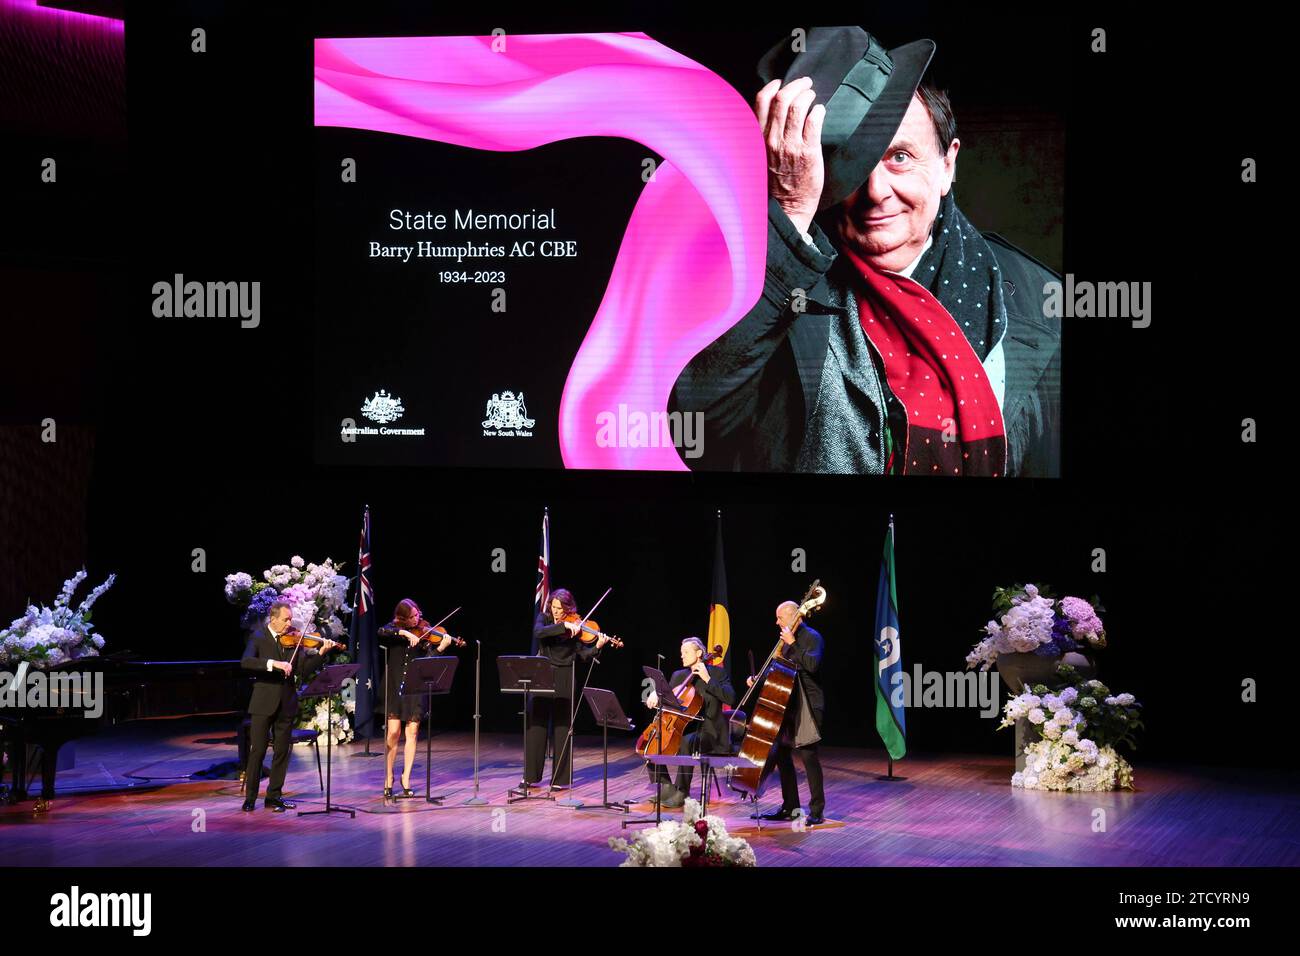 Members of the Australian Chamber Orchestra perform during the State Memorial Service for Australian comedian and actor Barry Humphries at the Sydney Opera House in Sydney, Friday, December 15, 2023. A State Memorial Service for Barry Humphries will recognise the late entertainers contribution to Australian arts and entertainment. AAP Image/Pool, David Gray NO ARCHIVING SYDNEY NSW AUSTRALIA *** Members of the Australian Chamber Orchestra perform during the State Memorial Service for Australian comedian and actor Barry Humphries at the Sydney Opera House in Sydney, Friday, December 15, 2023 A S Stock Photo